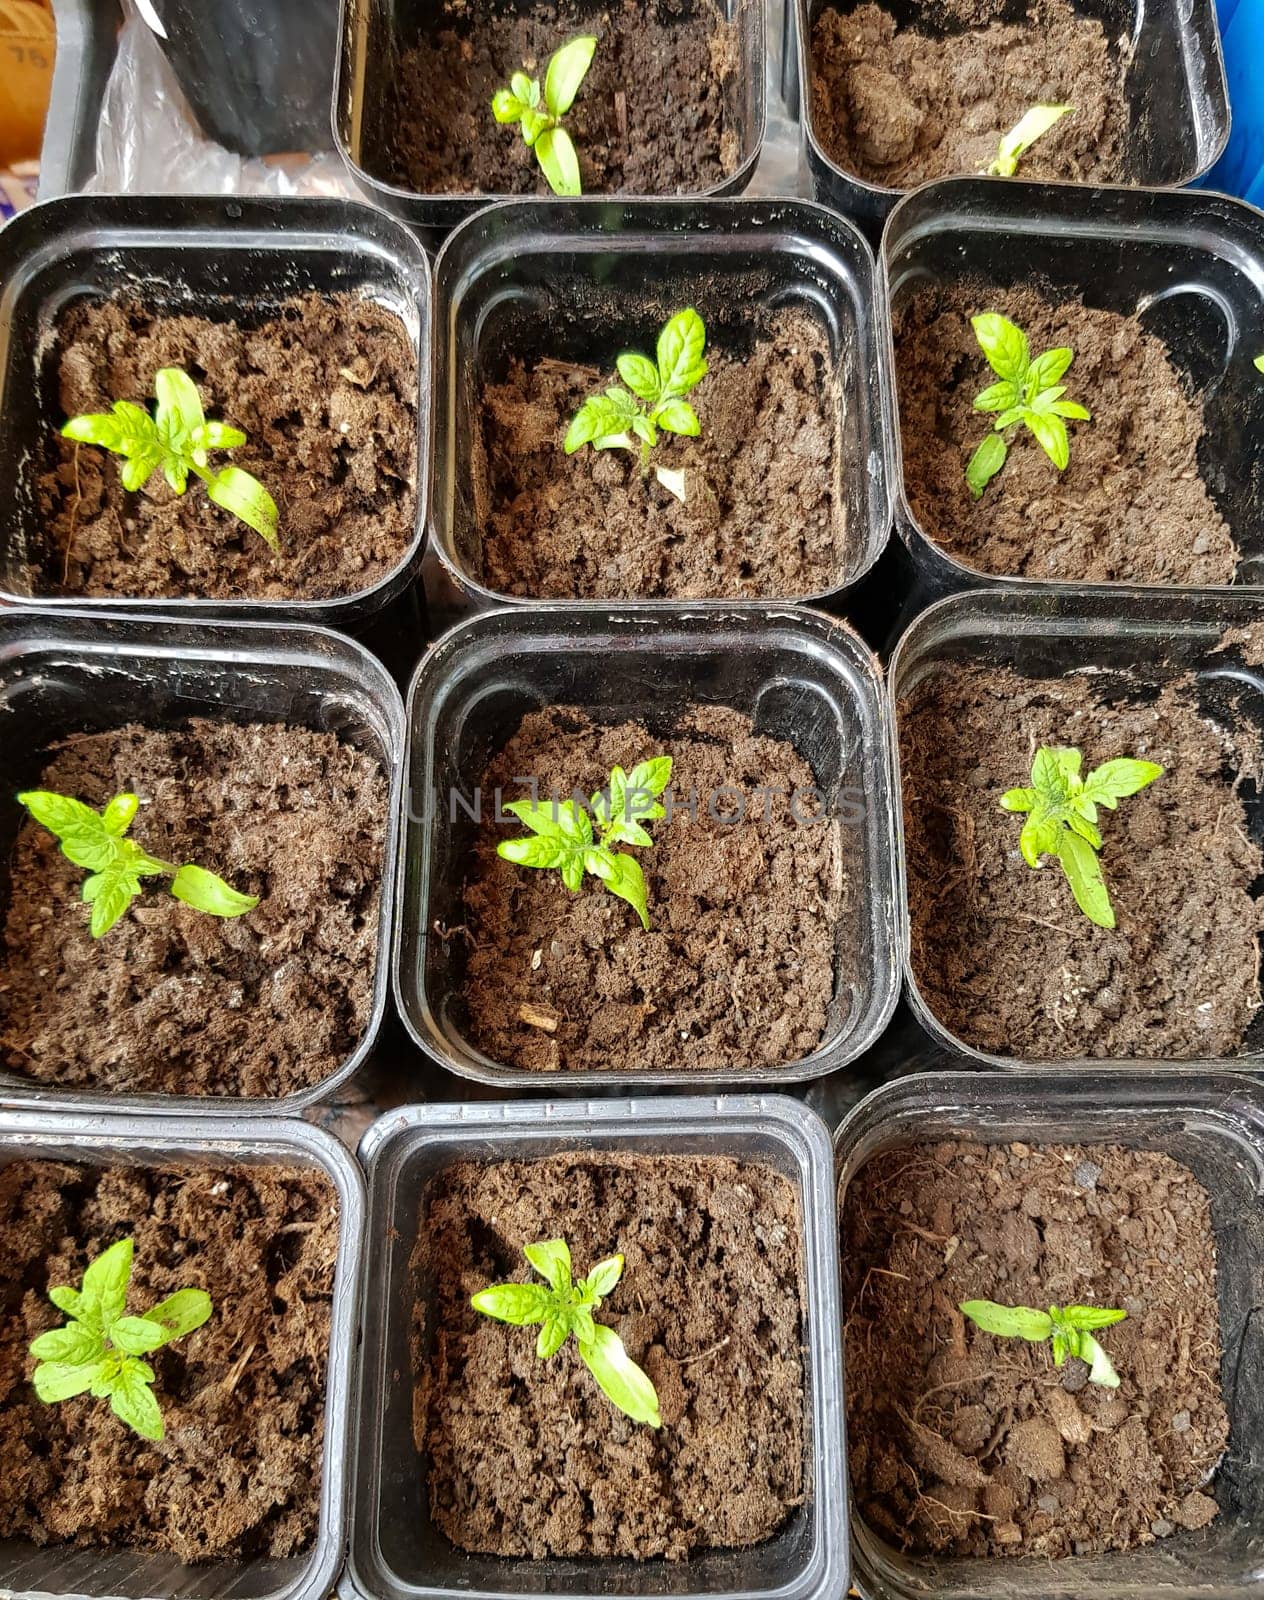 The concept of agriculture and farming. Top view of sprouted tomato seedlings in plastic containers. Growing vegetable seedlings for subsequent planting in open ground or greenhouses.